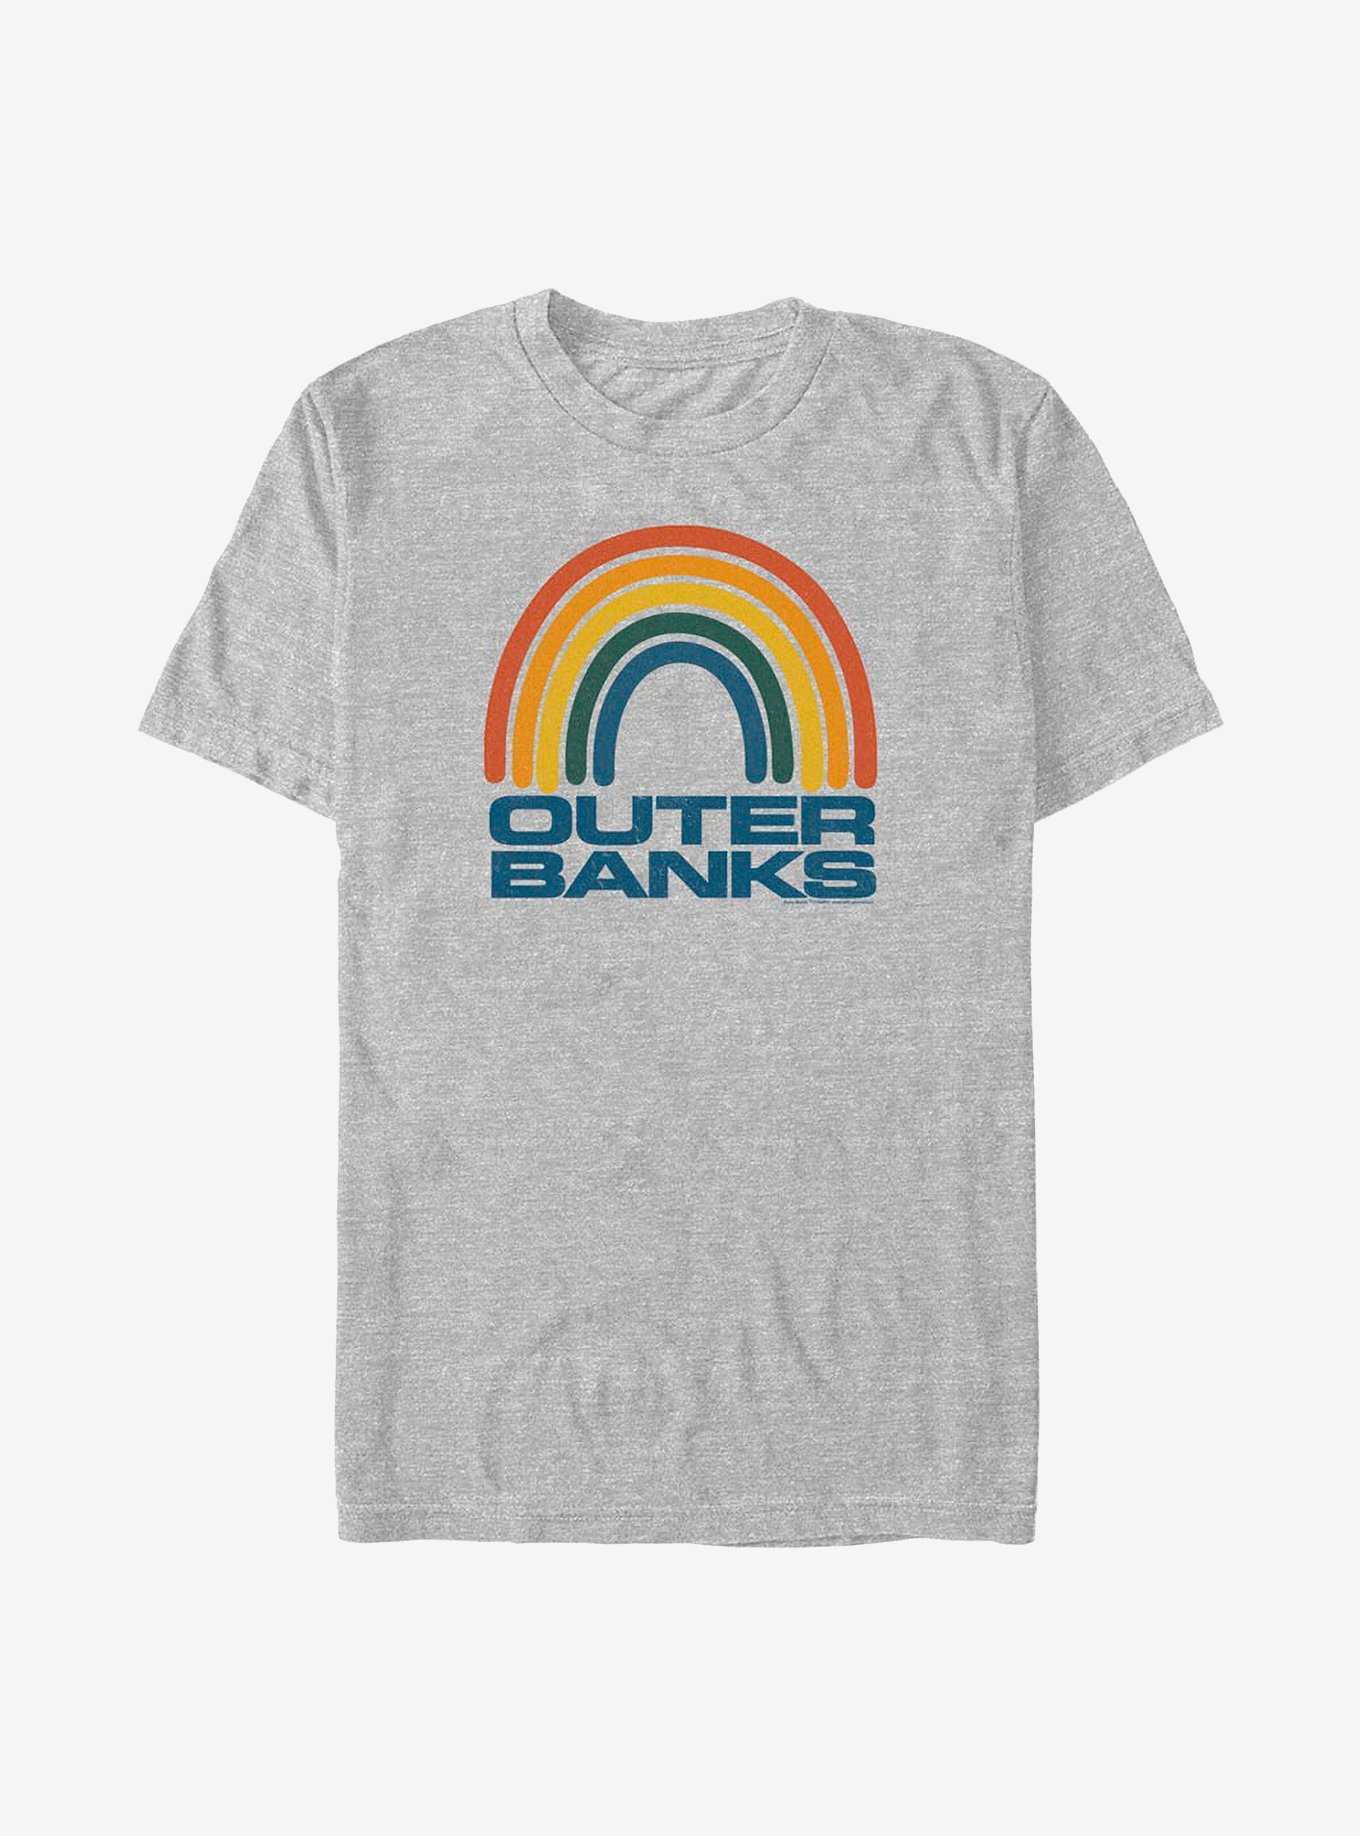 Outer Banks OBX Rainbow T-Shirt, , hi-res